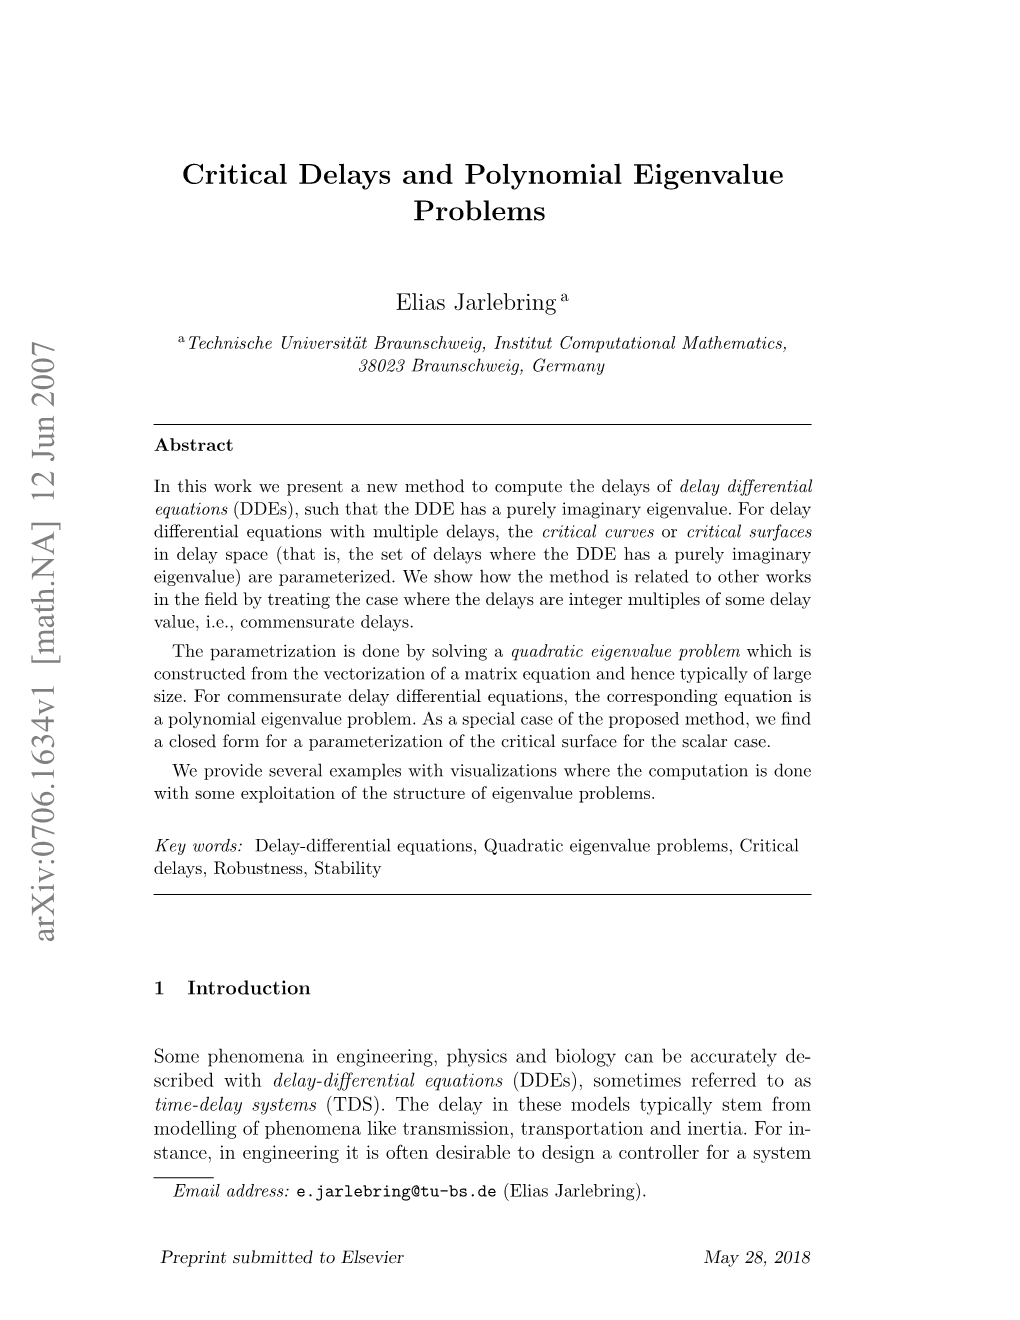 Critical Delays and Polynomial Eigenvalue Problems